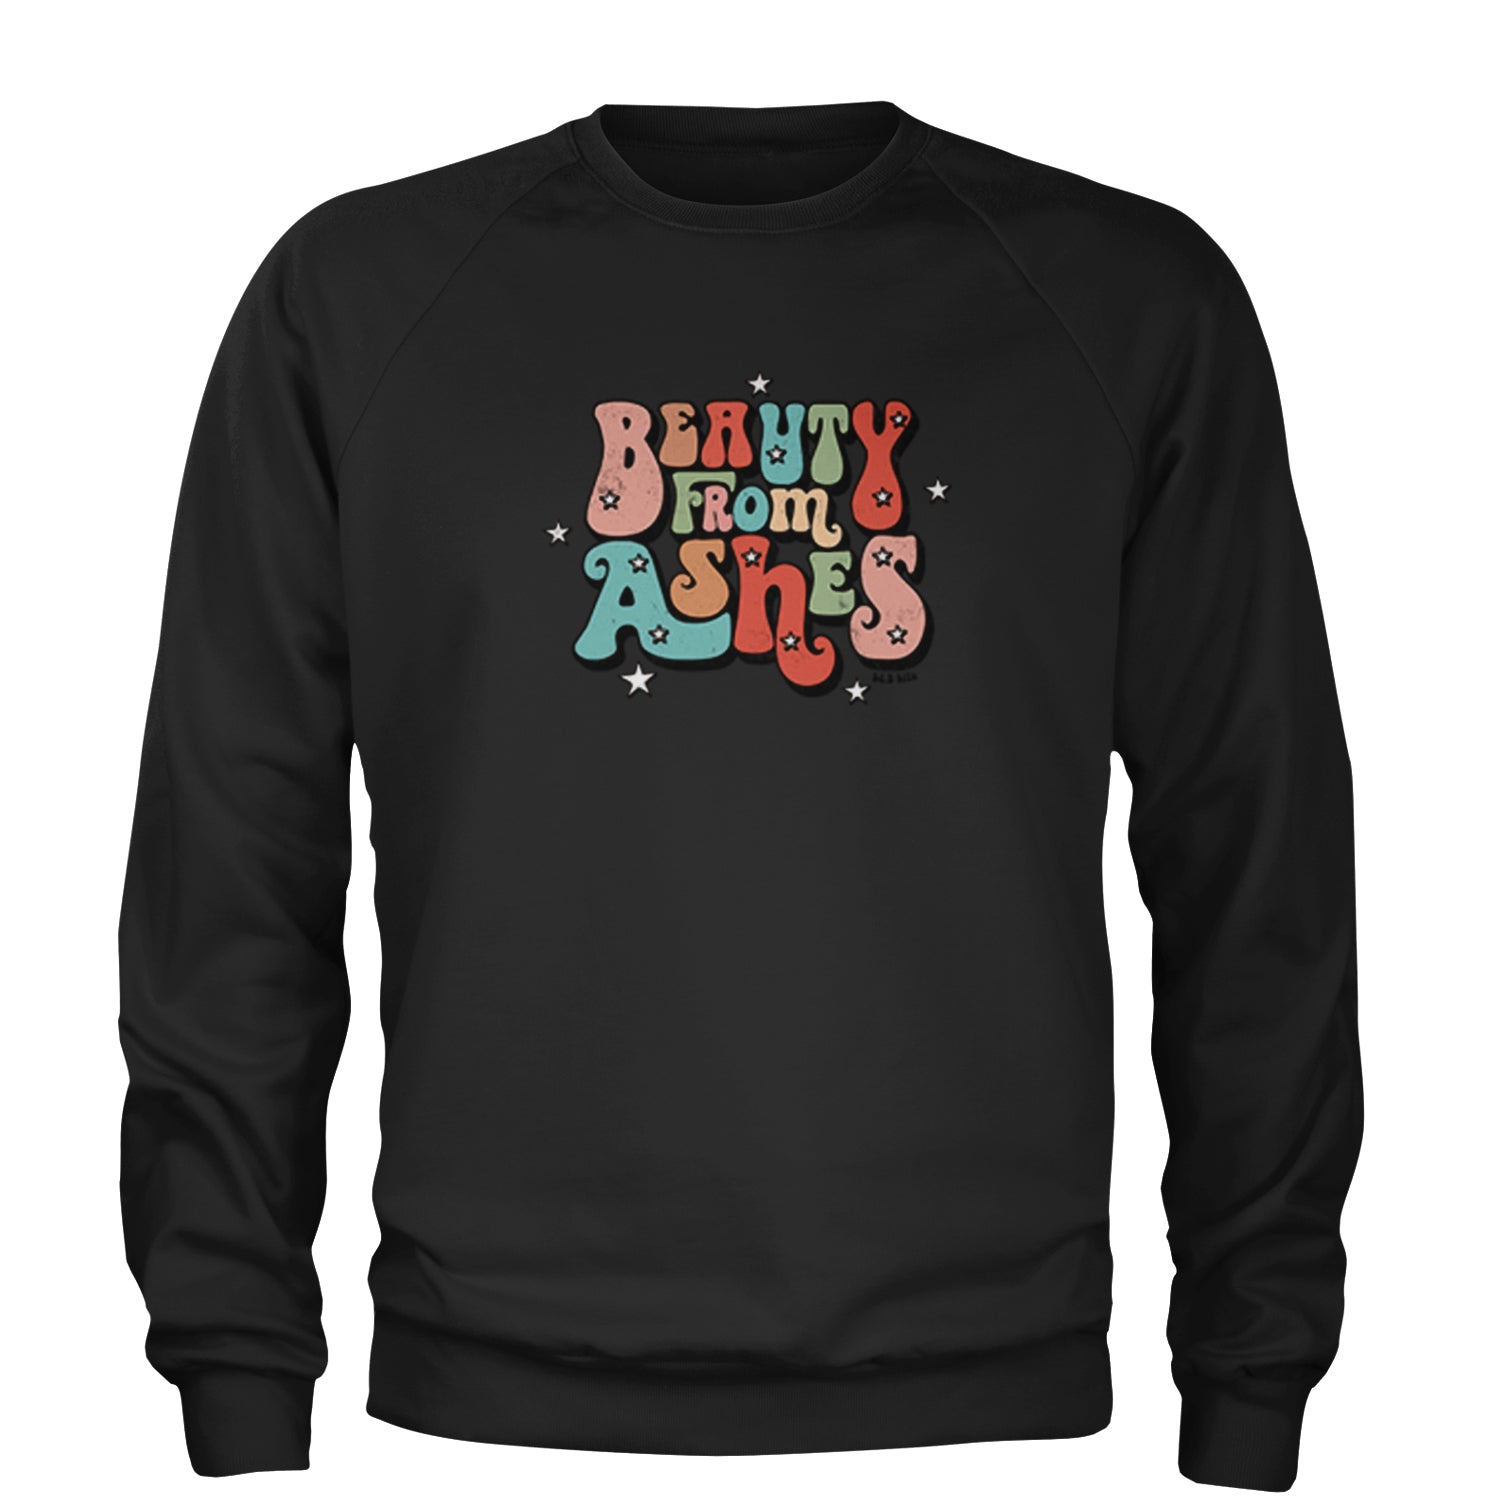 Beauty From Ashes Adult Crewneck Sweatshirt